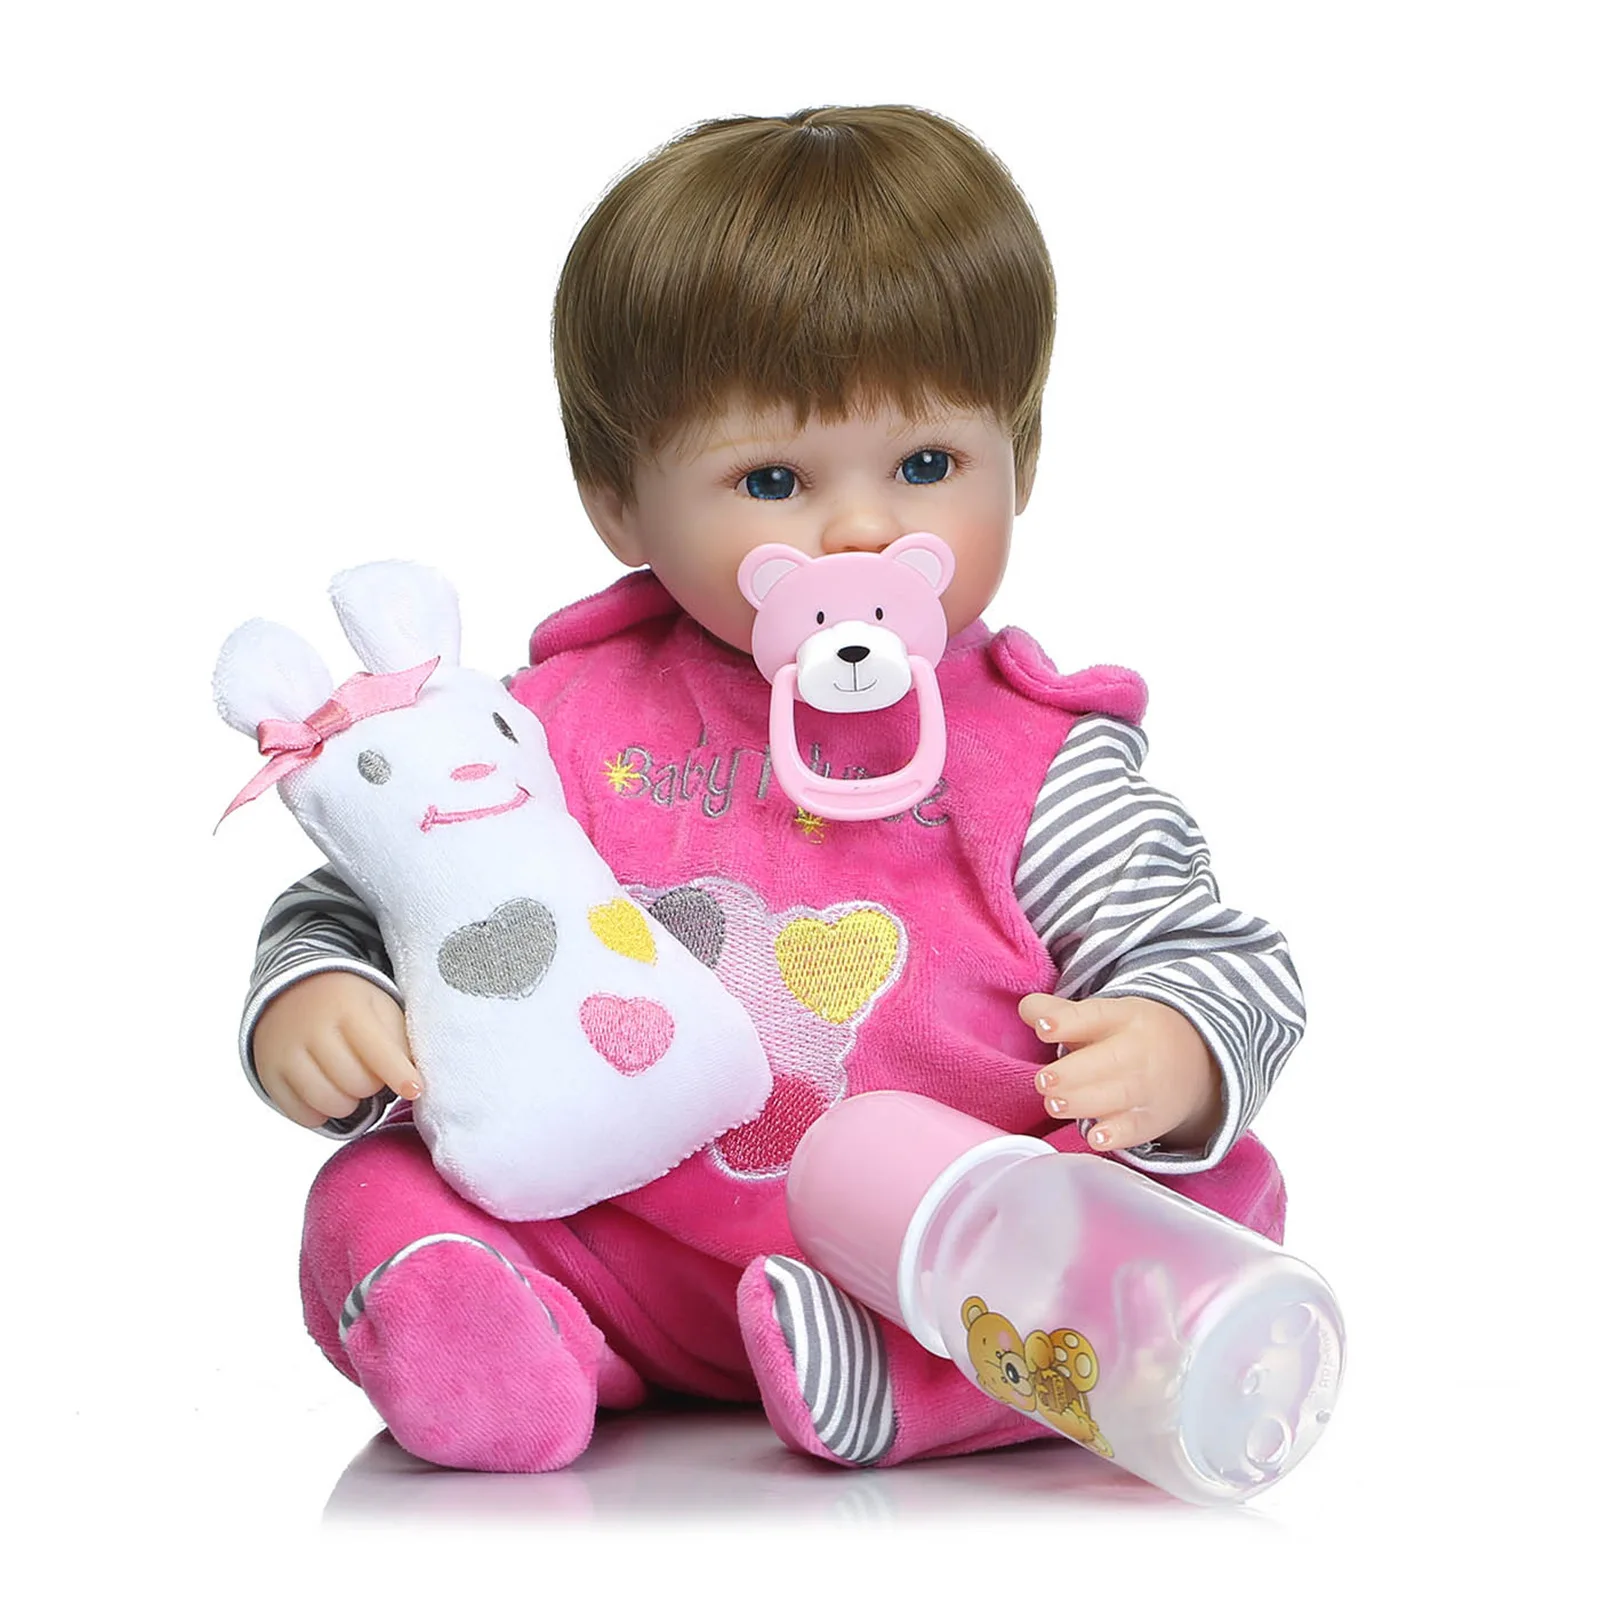 

Pink Cute Infant Reborn Baby Doll Toy Doll Clothes Beautiful Bedroom Sleeping Realistic Reborn Girl Toys Christmas Gift AA50DT